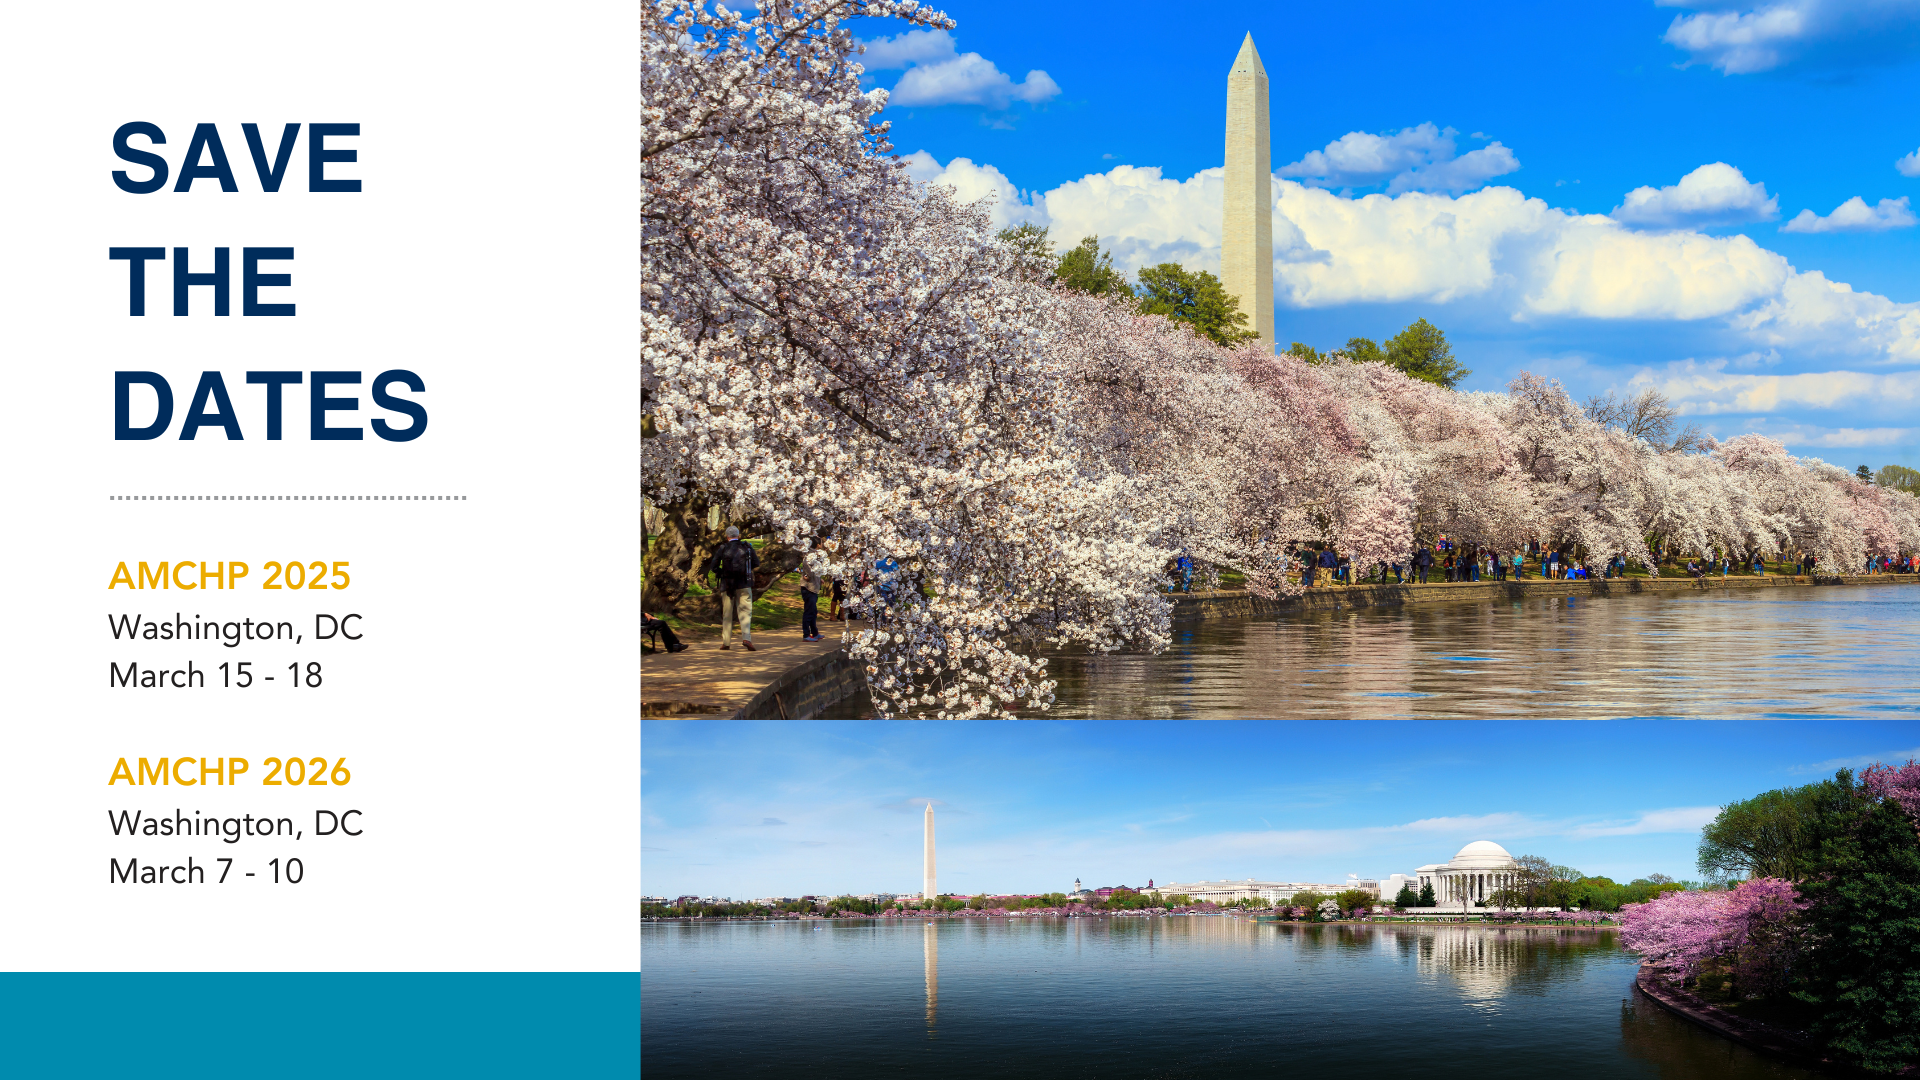 This graphic includes two images of Washington, DC, and Save the Date information for AMCHP 2025, which will be held from March 15 to 18, and AMCHP 2026, which will be held from March 7 to 10.